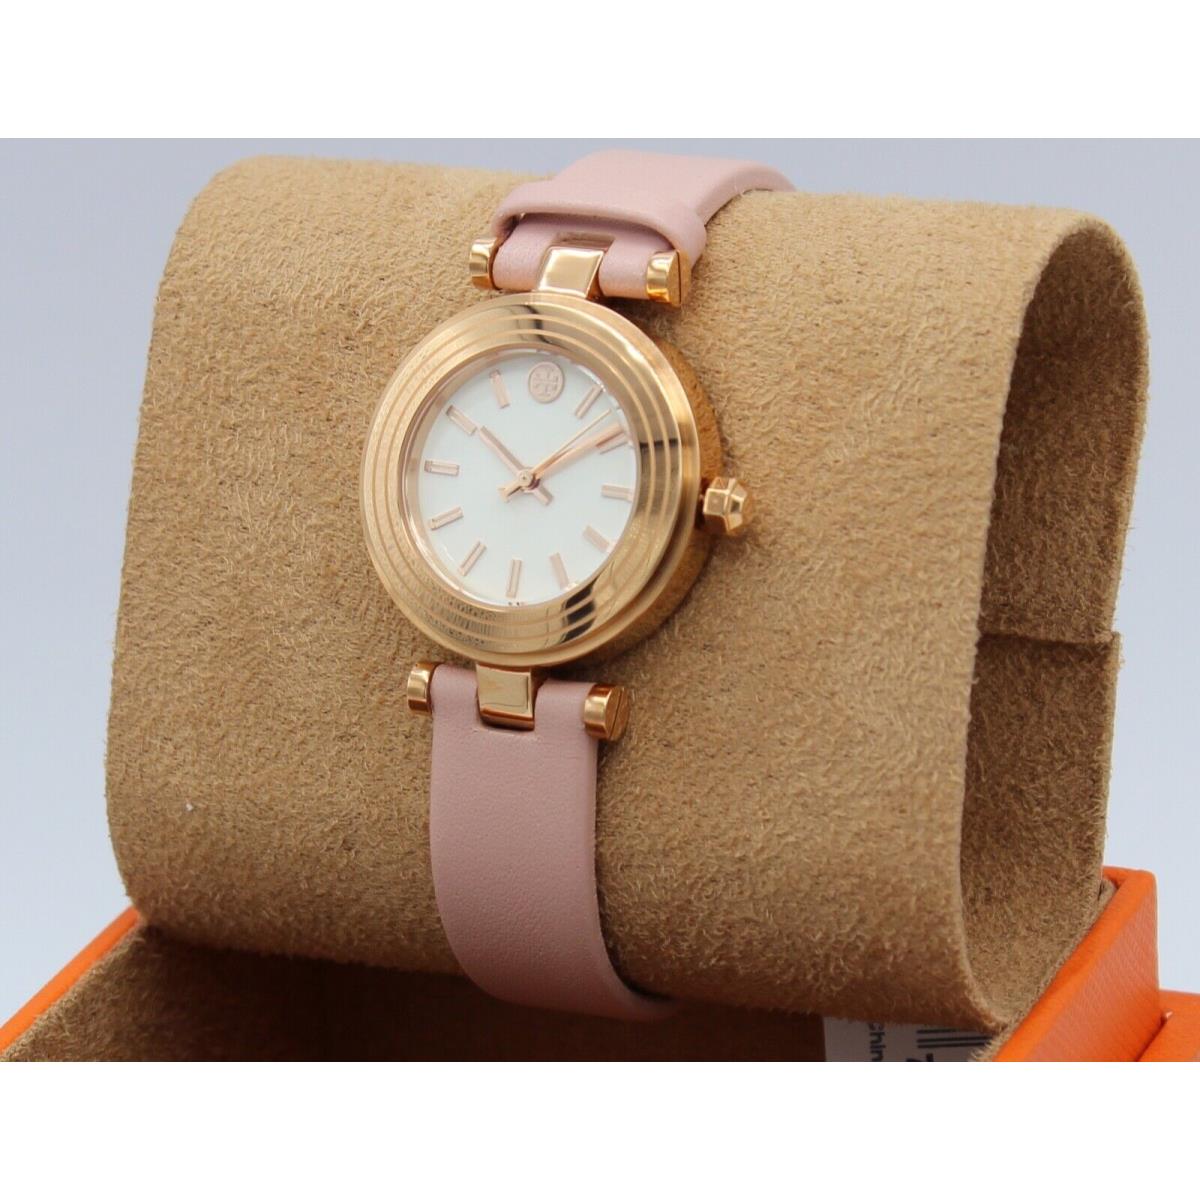 Tory Burch watch CLASSIC - Rose Gold Dial, Pink Band, Rose Gold Bezel